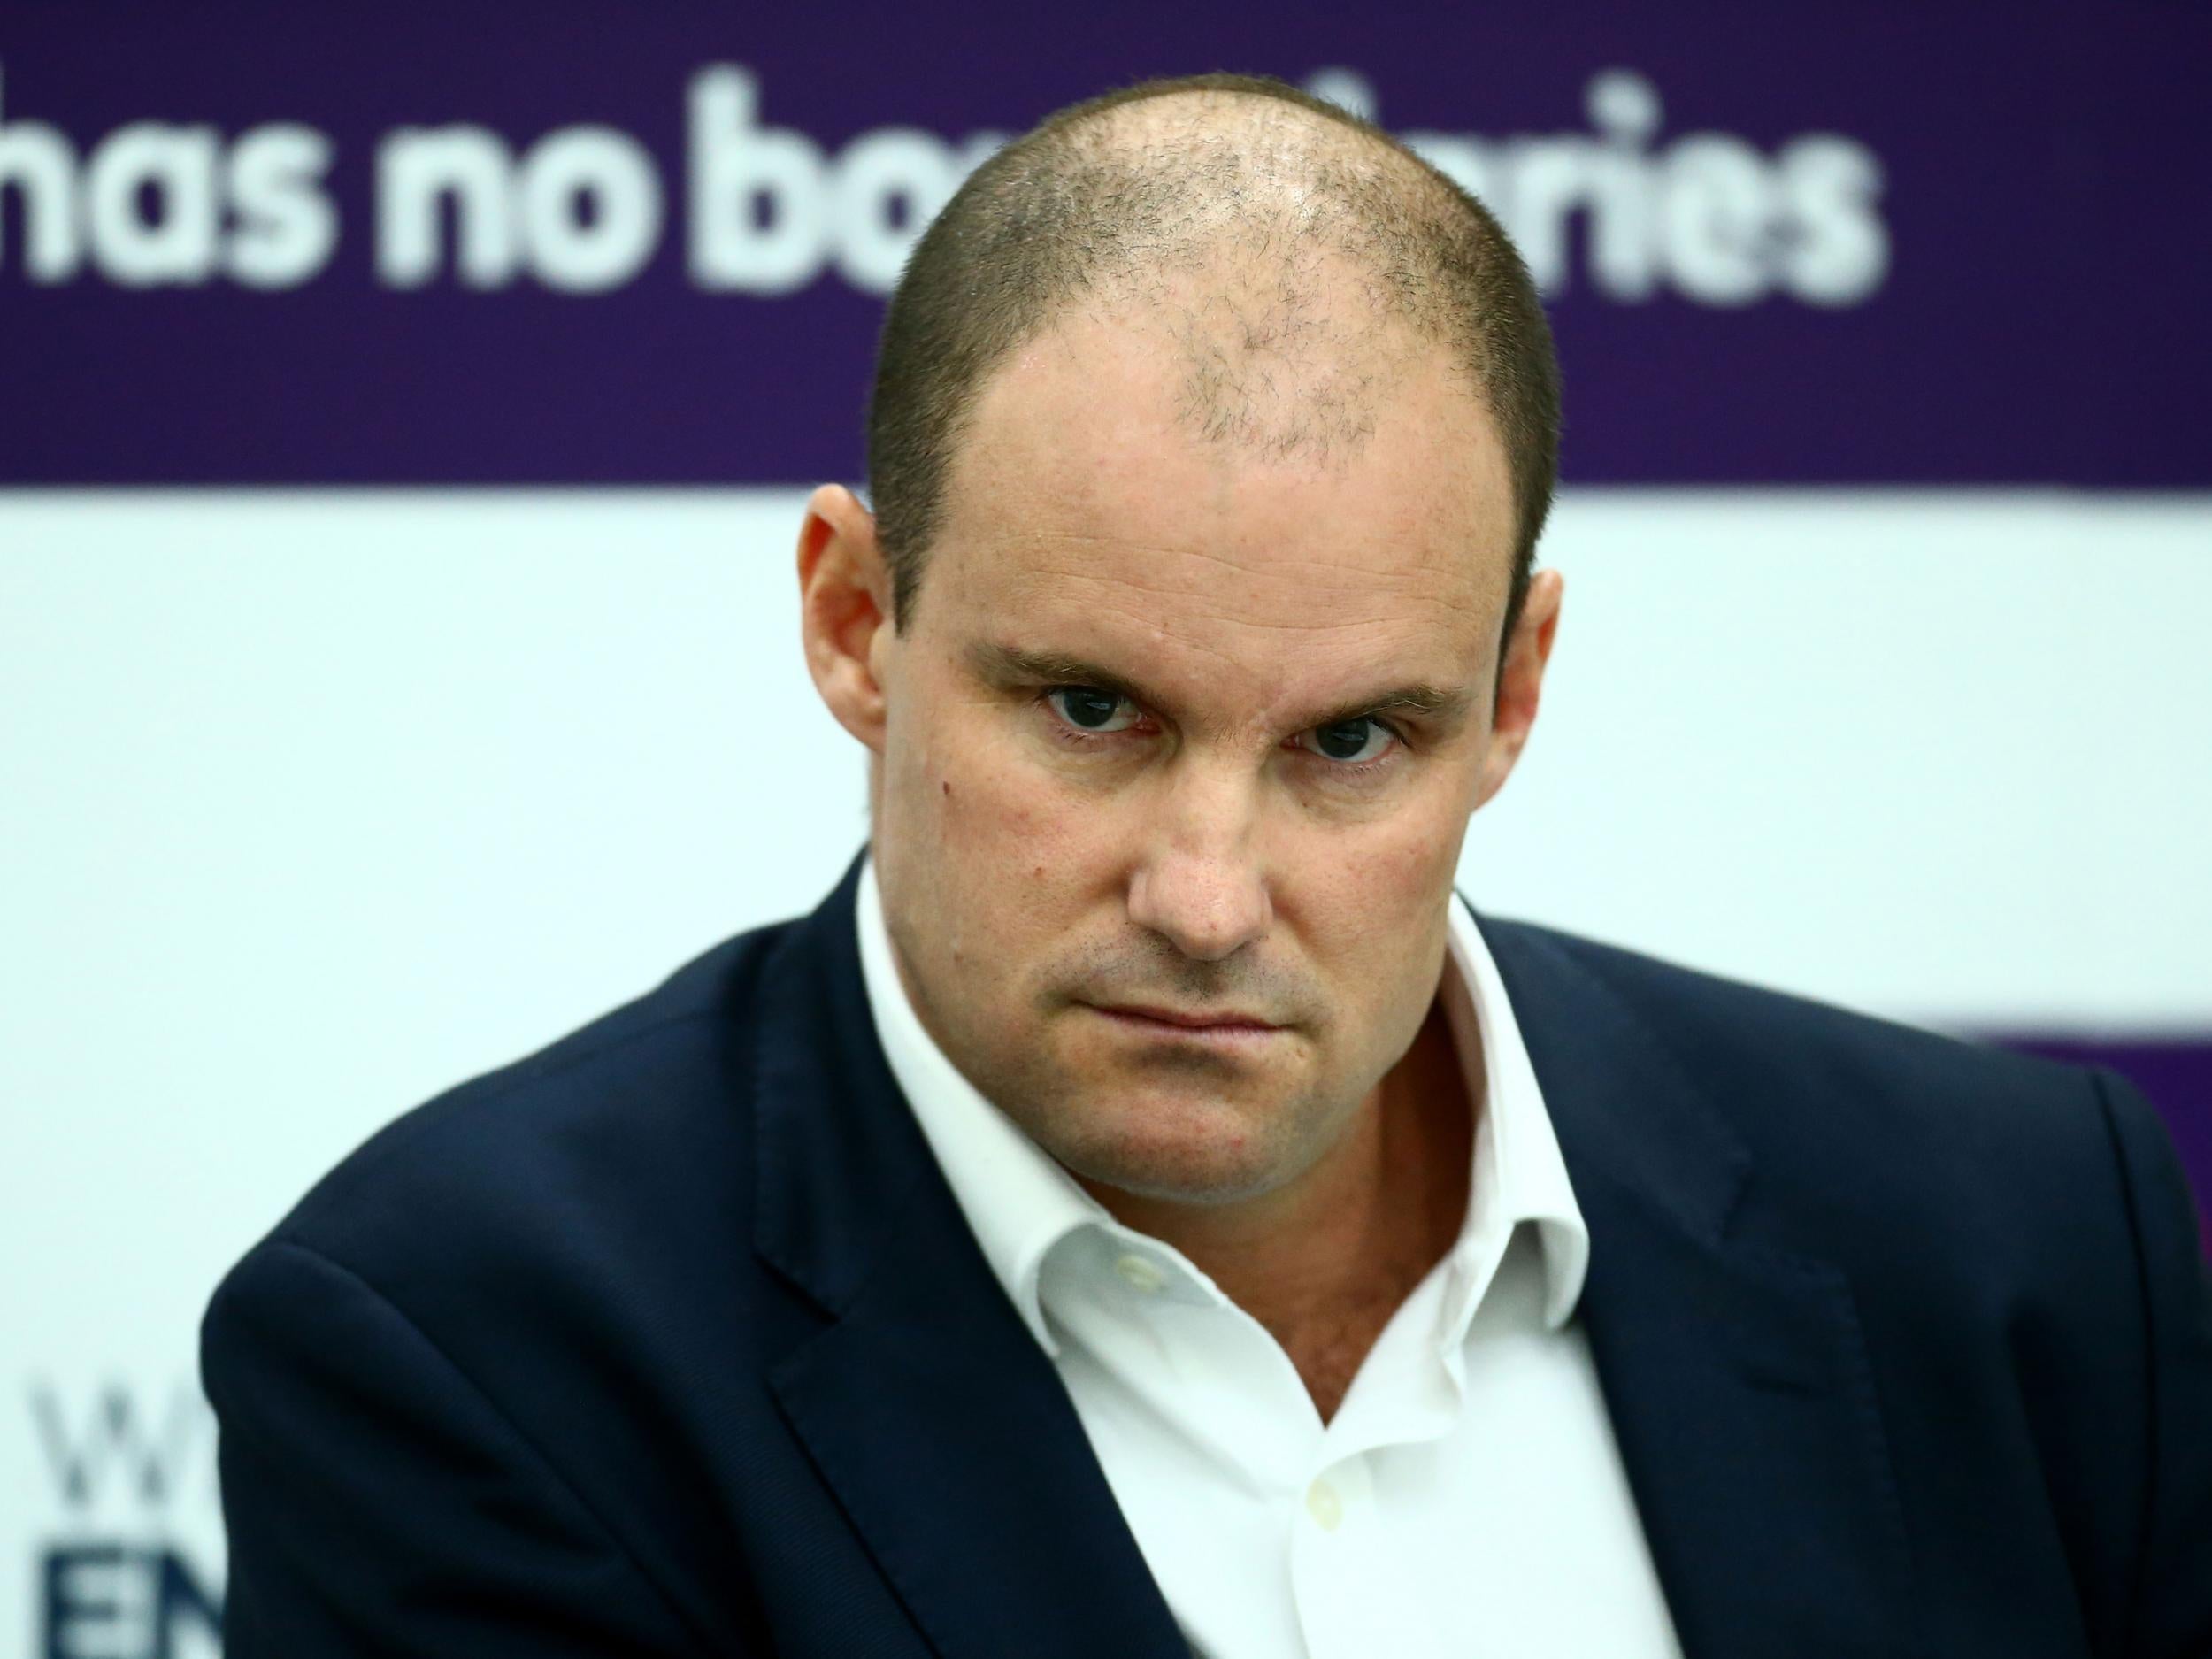 Andrew Strauss' comments betray a worrying mindset